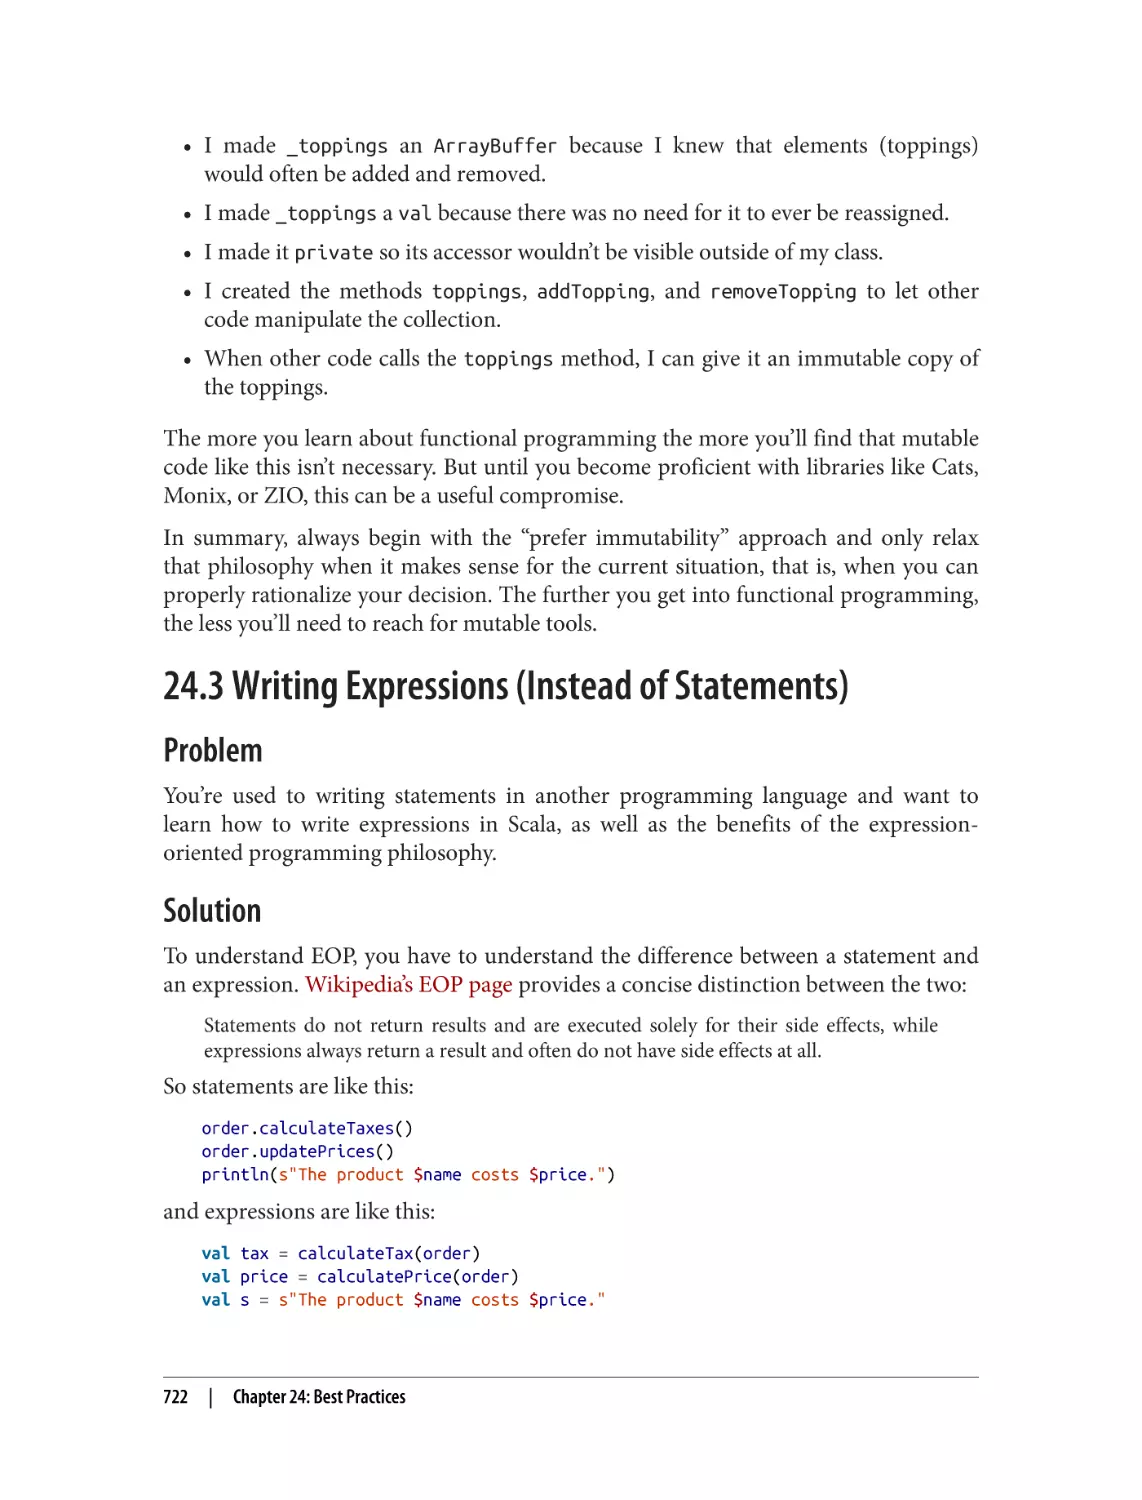 24.3 Writing Expressions (Instead of Statements)
Problem
Solution